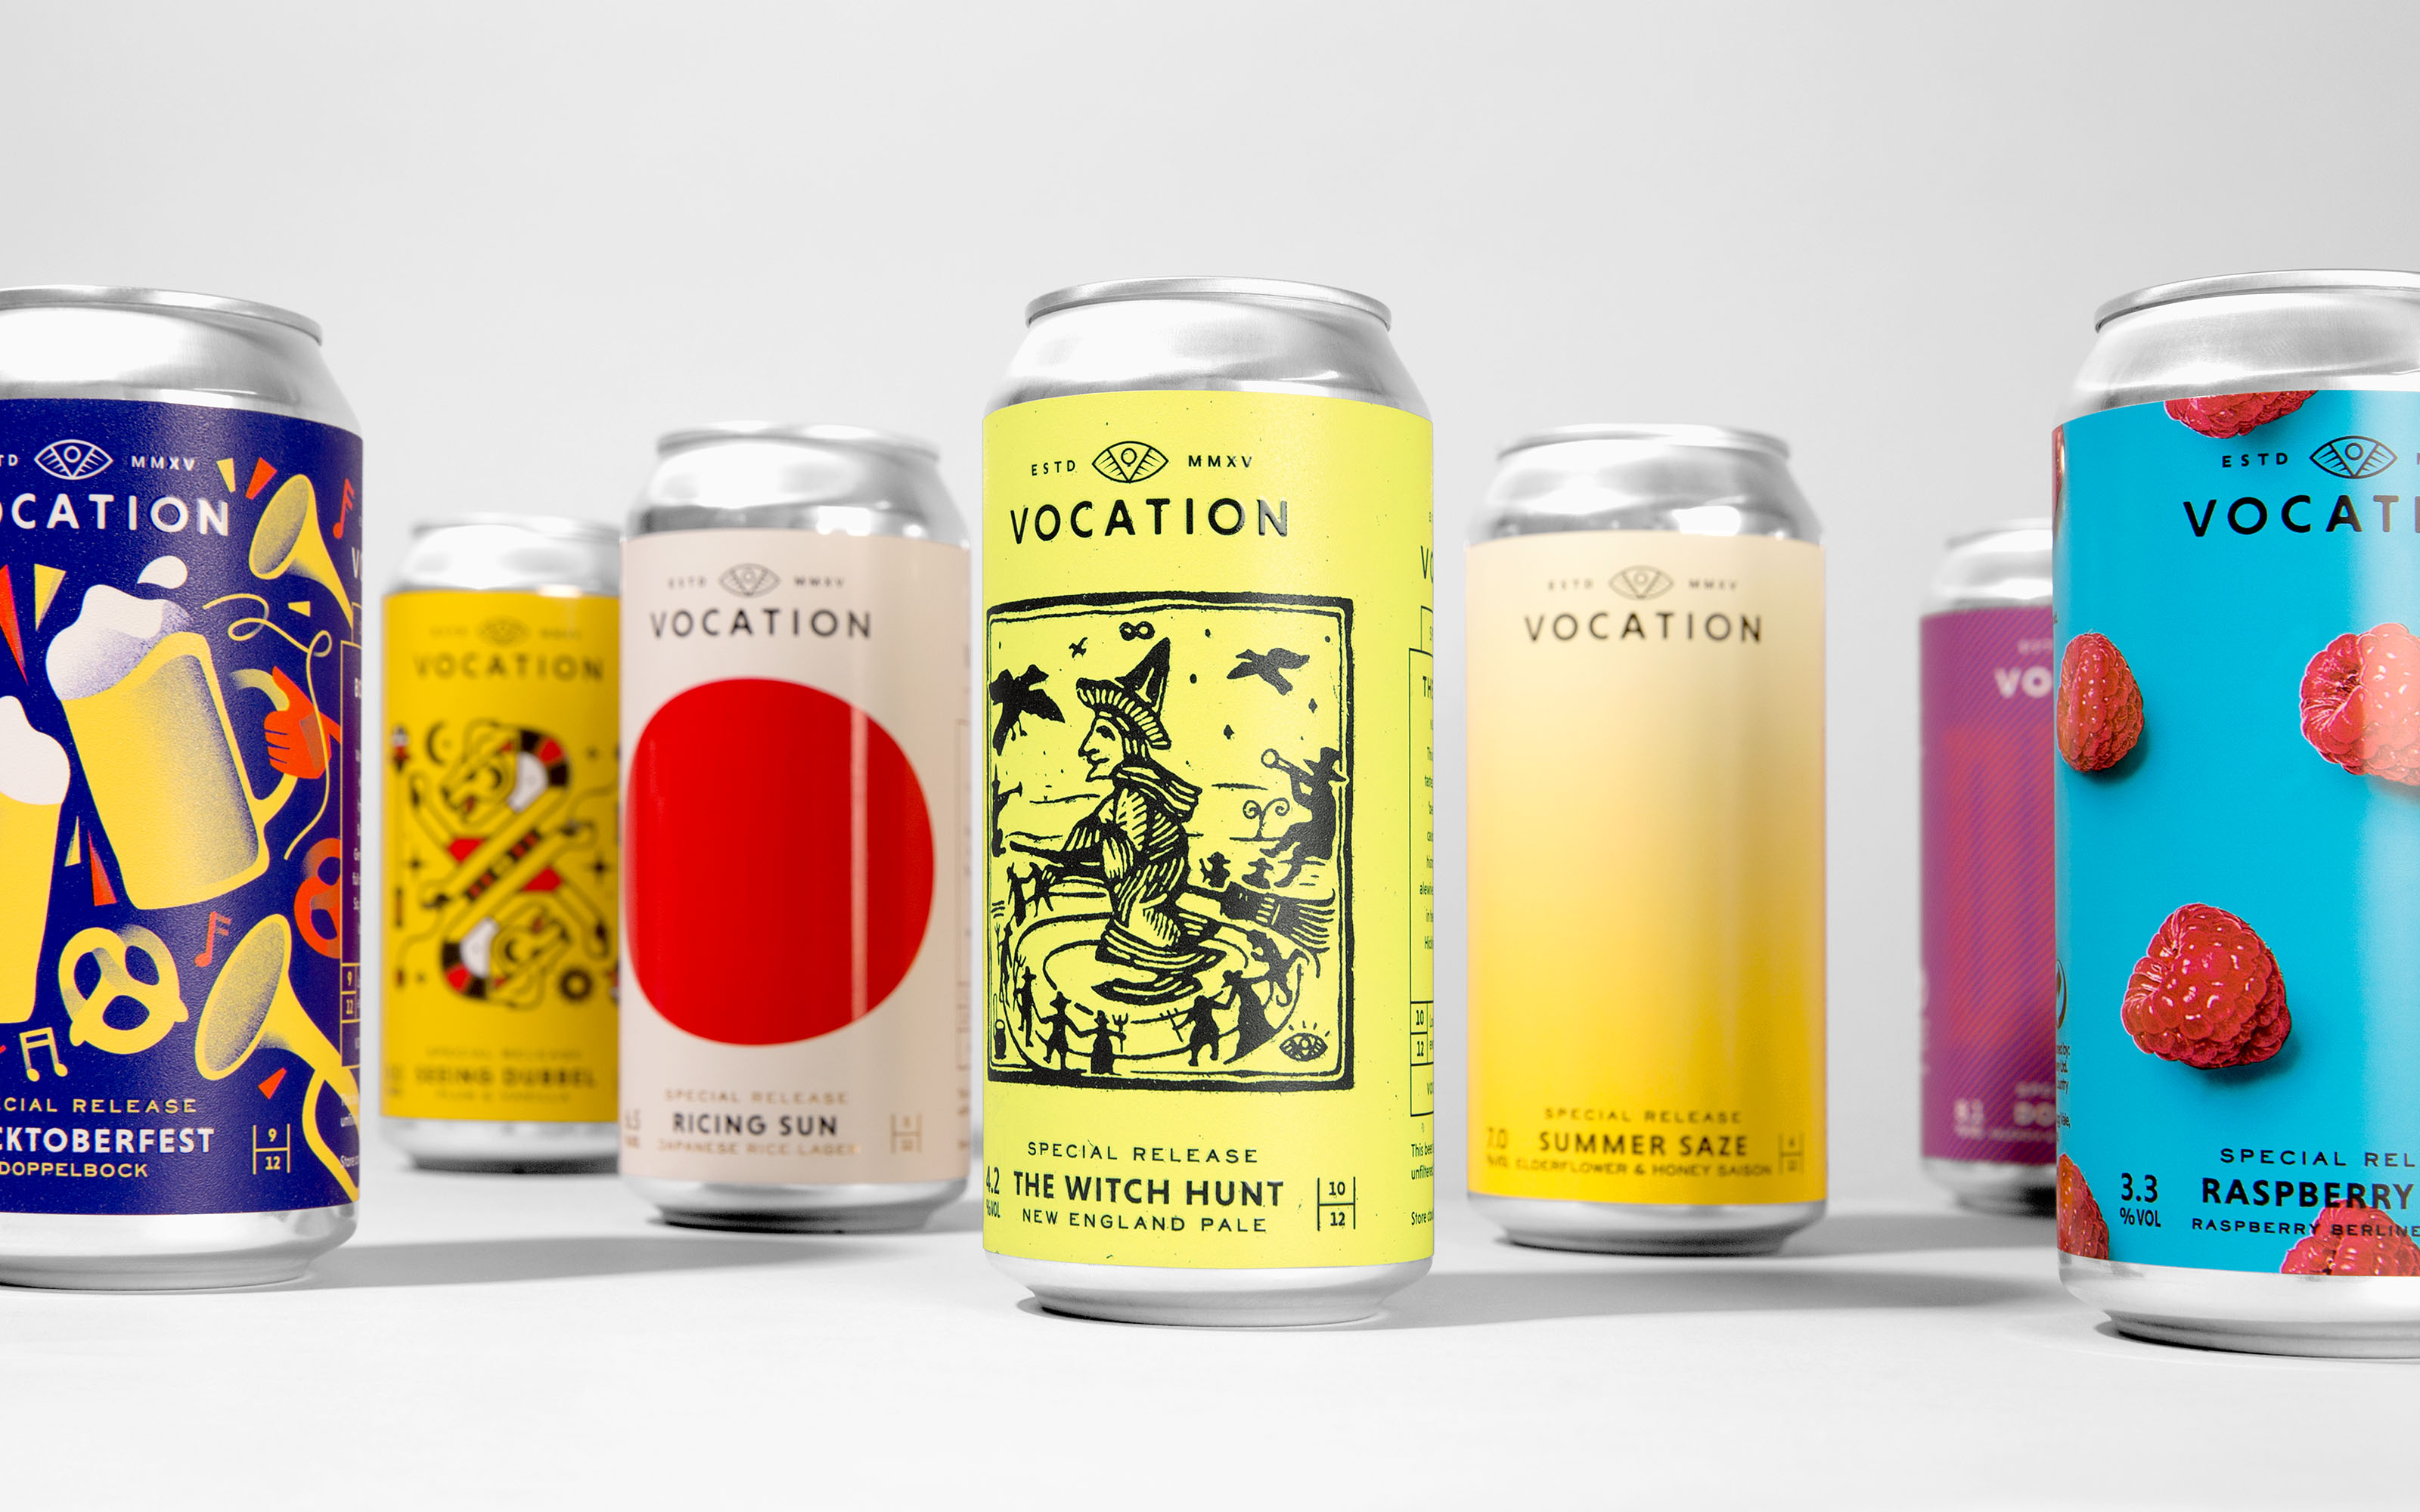 Robot Food and Vocation Brewery Partner for a Whole Year of Special Editions